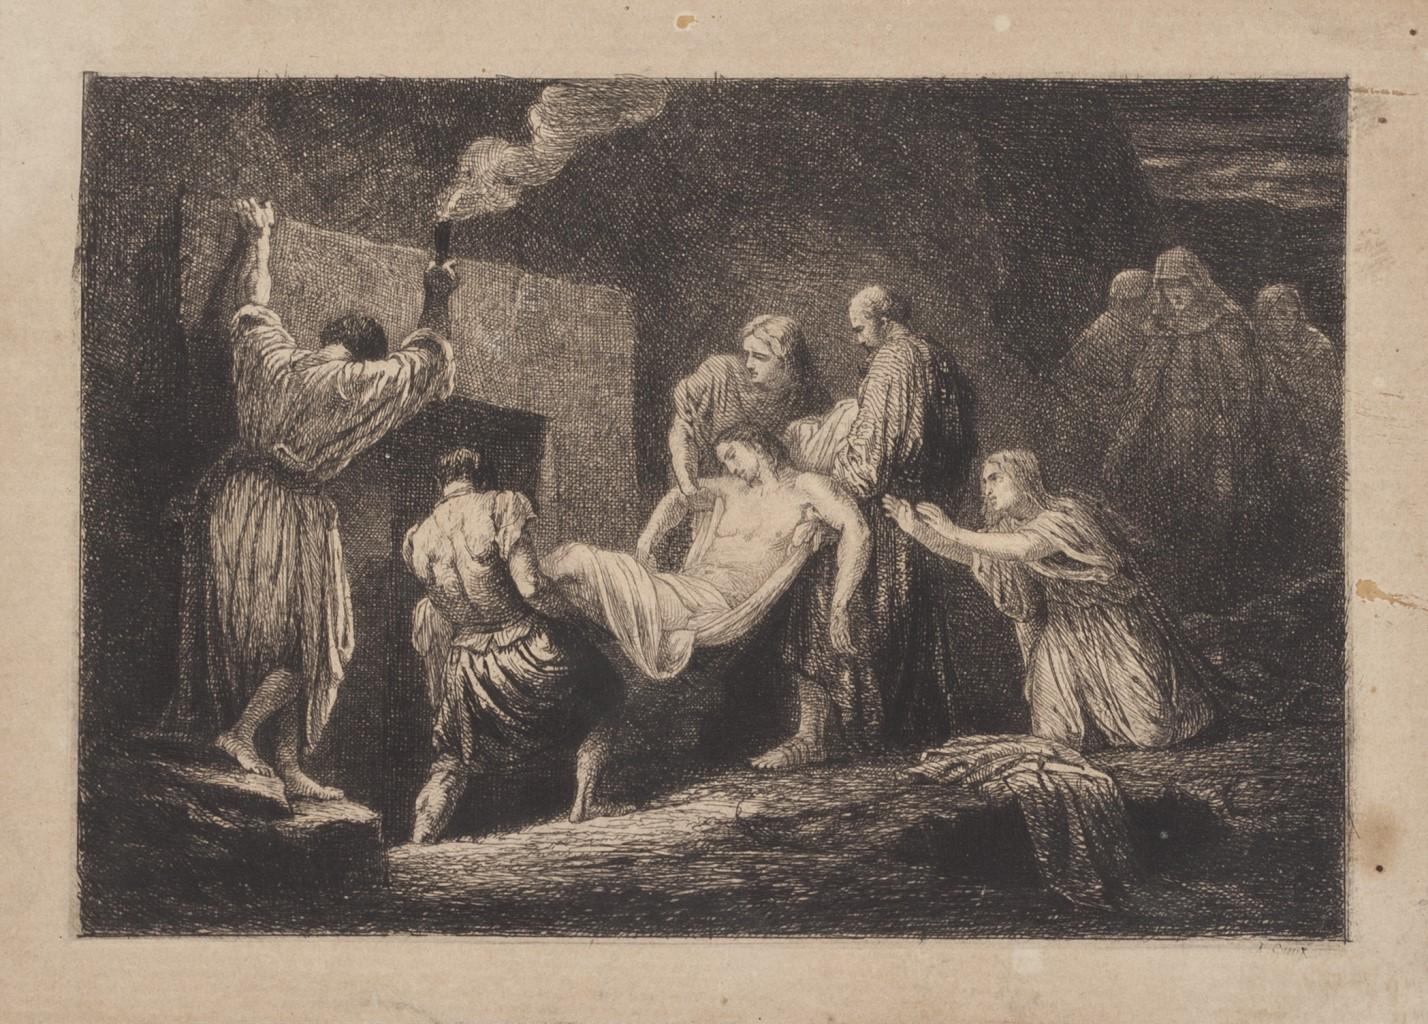 Unknown Figurative Print - Deposition of Christ - Etching Print - 19th Century